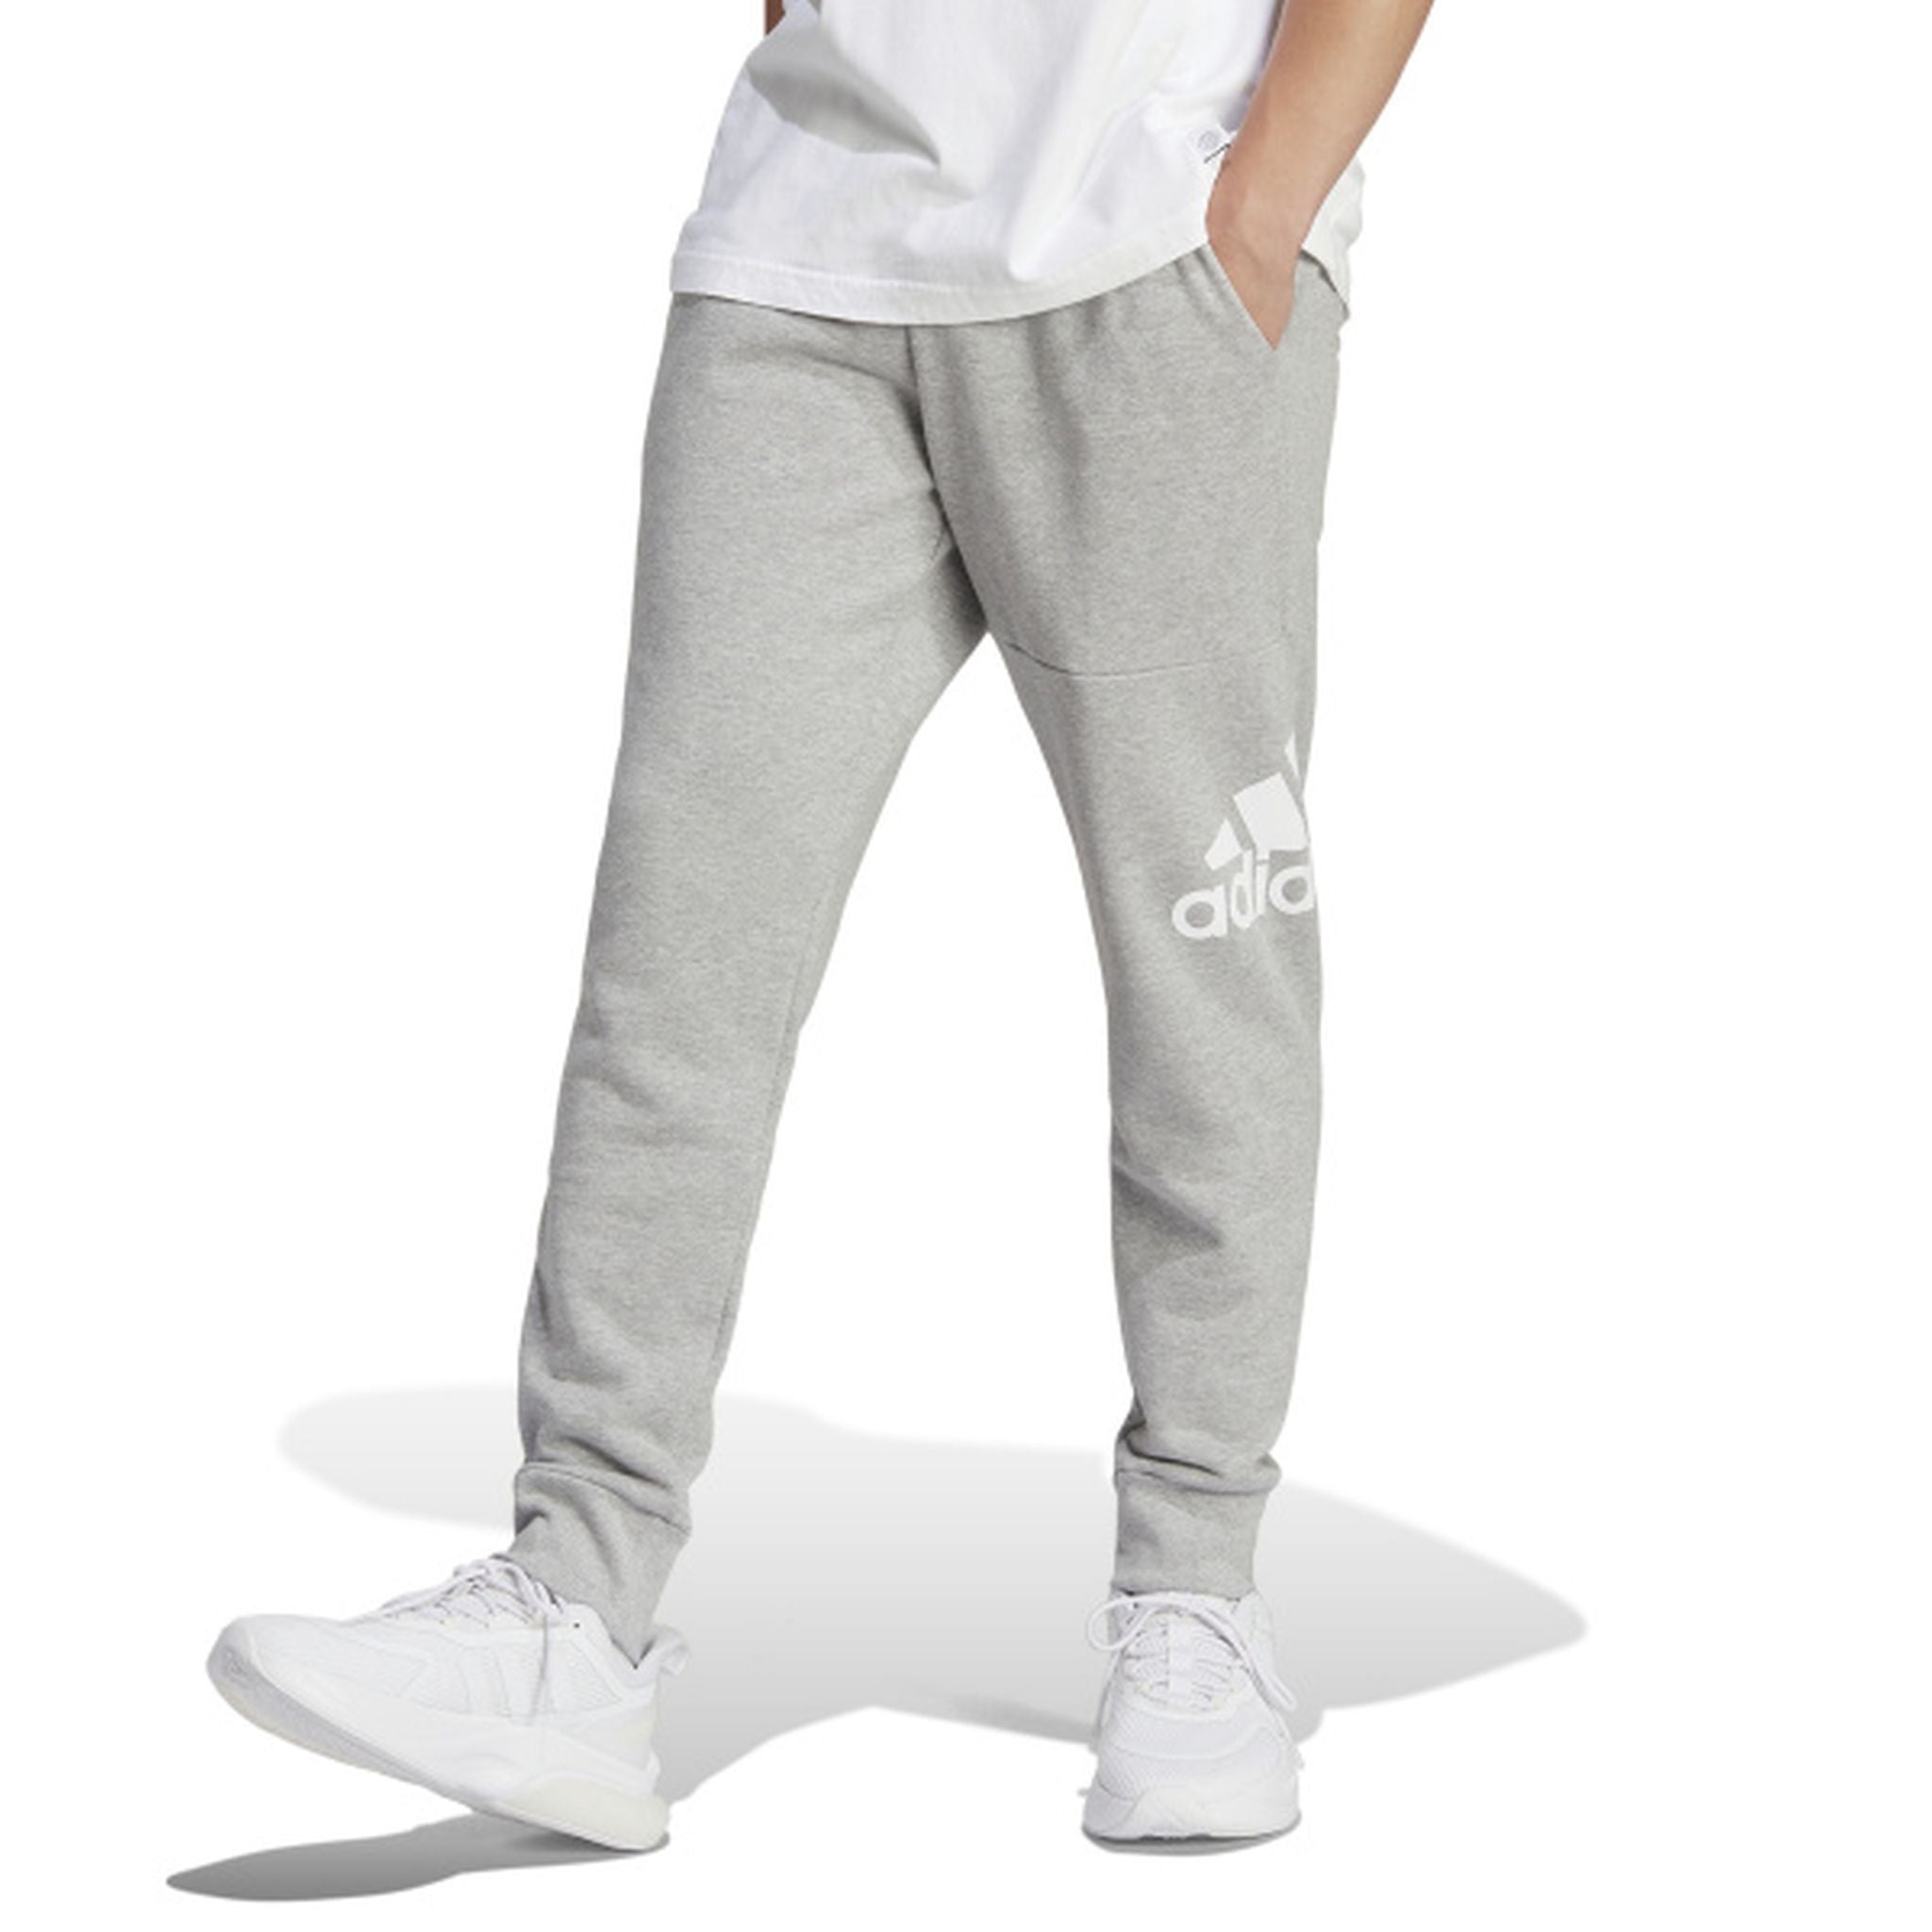 Adidas Mens Big Logo French Terry Tapered Cuff Pant